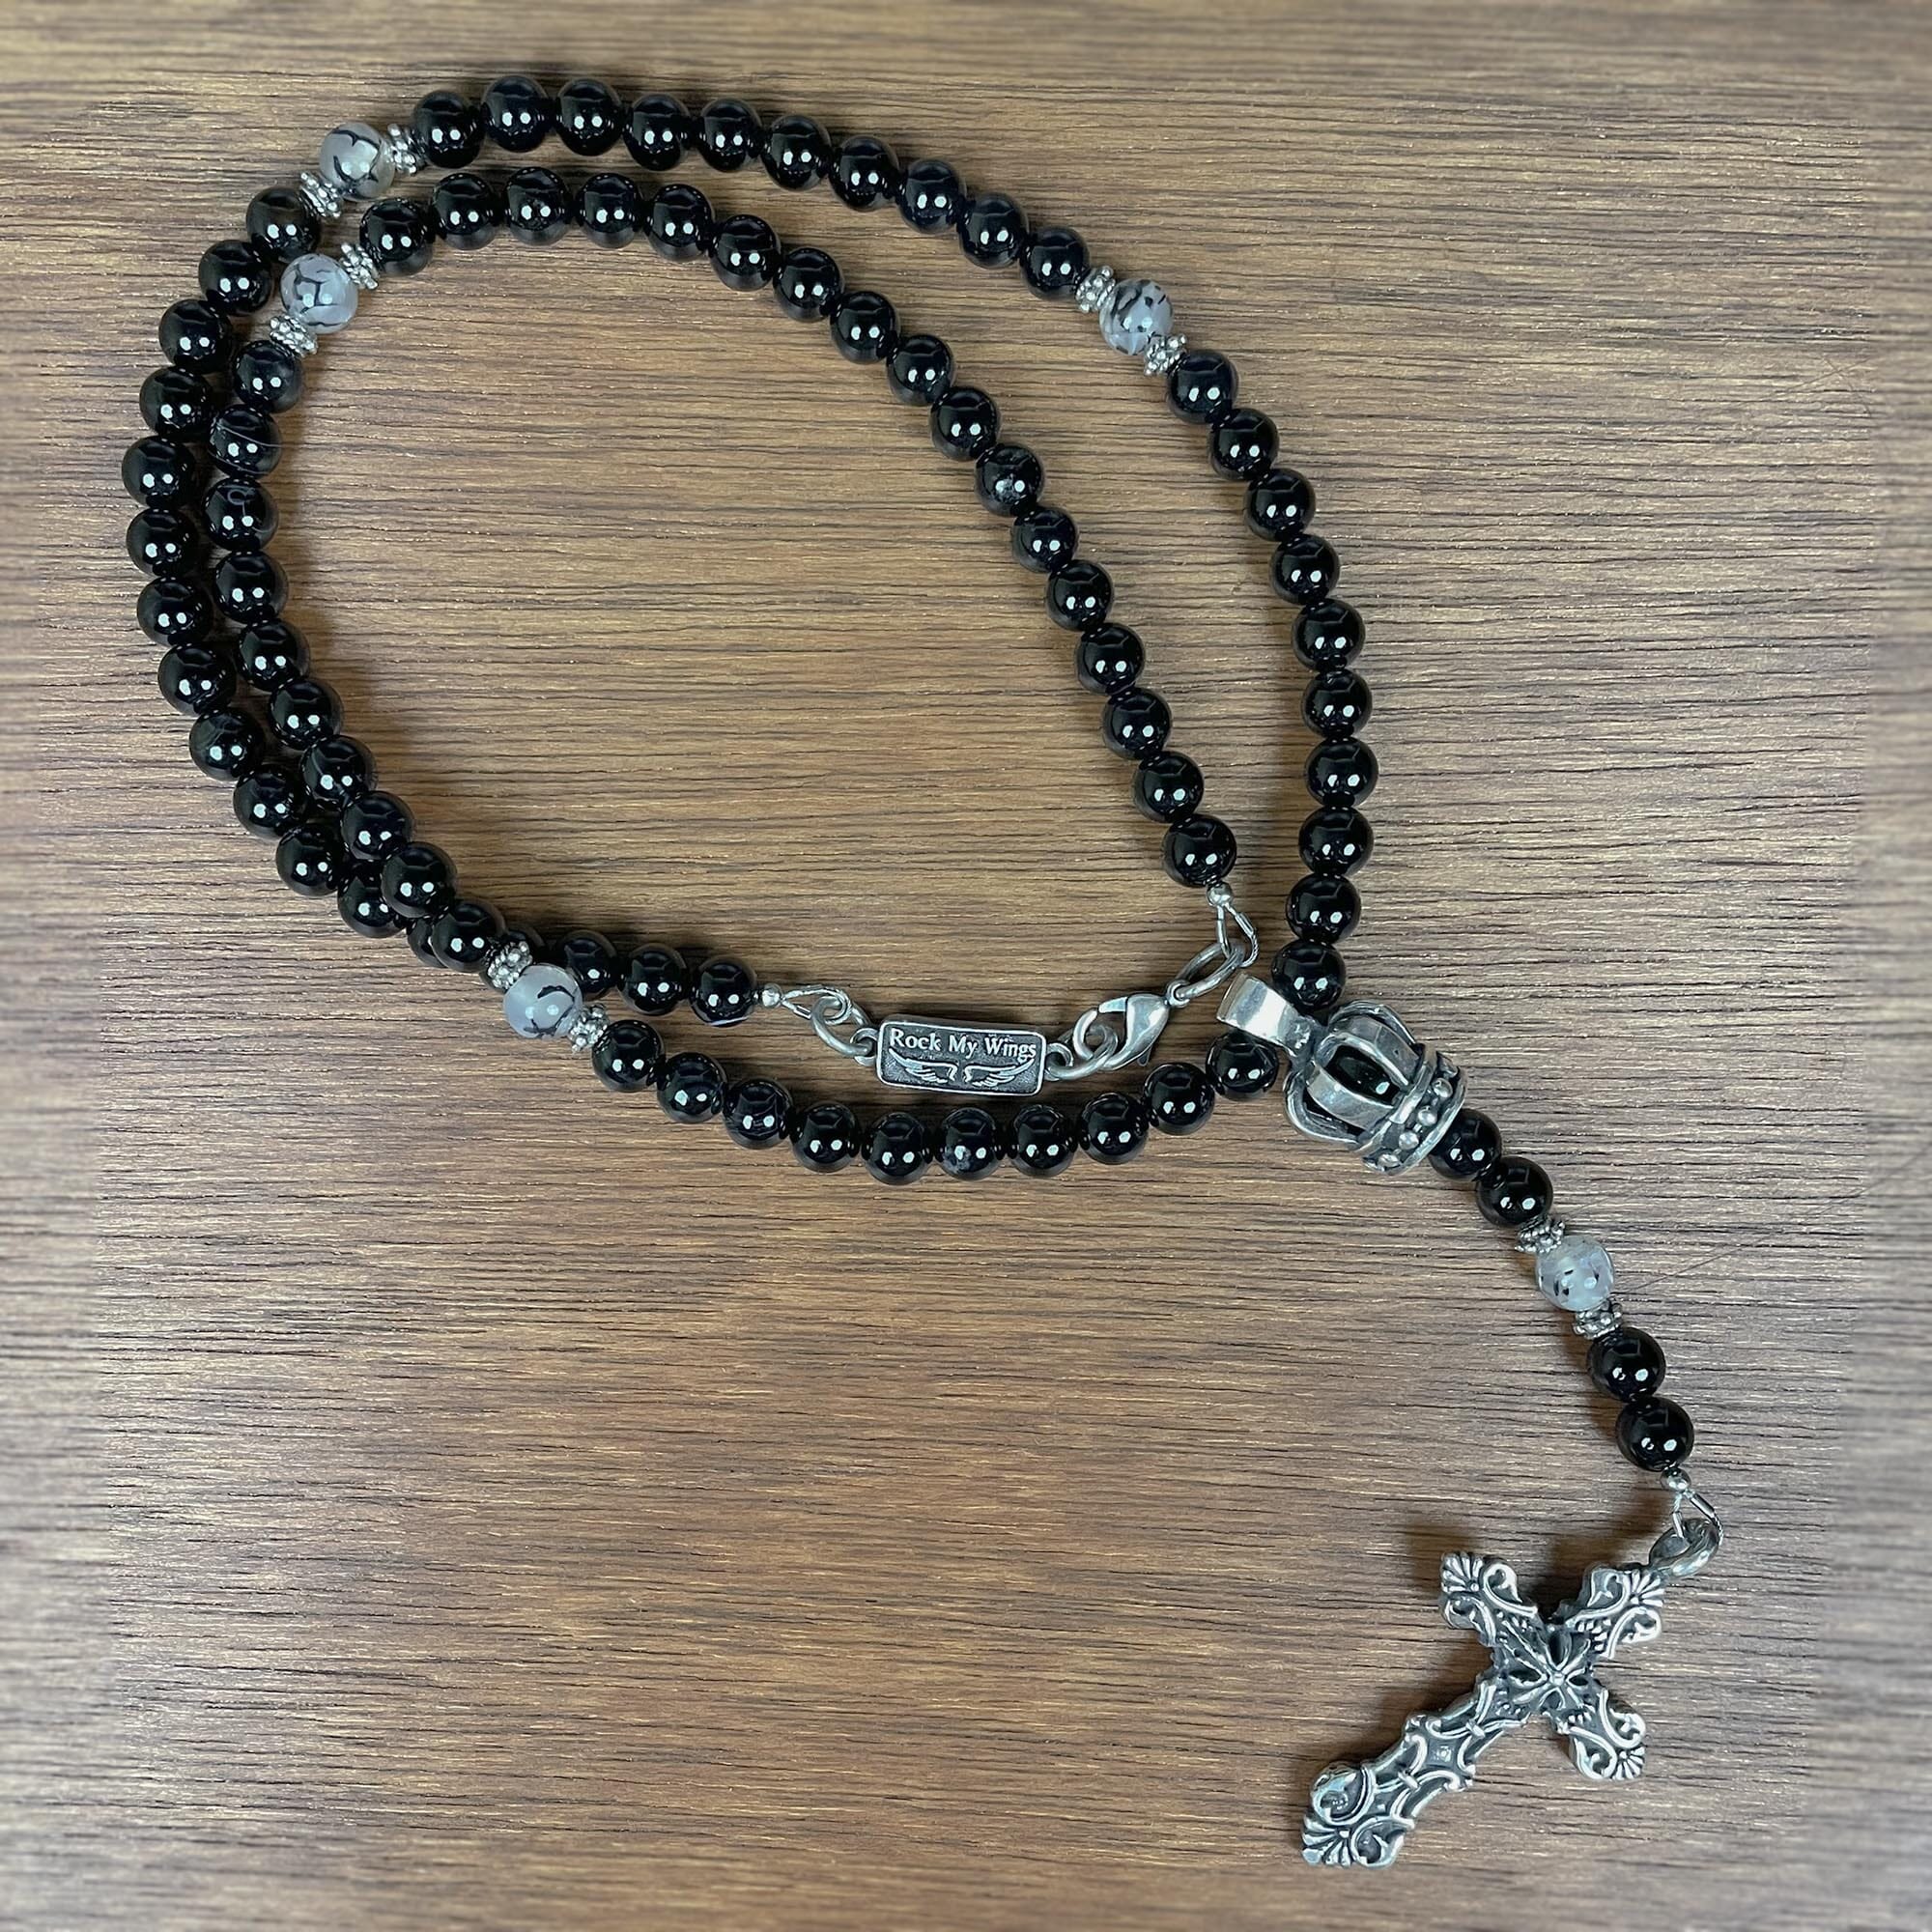 Rocker Beaded Rosary Necklace for Men by Rock my Wings